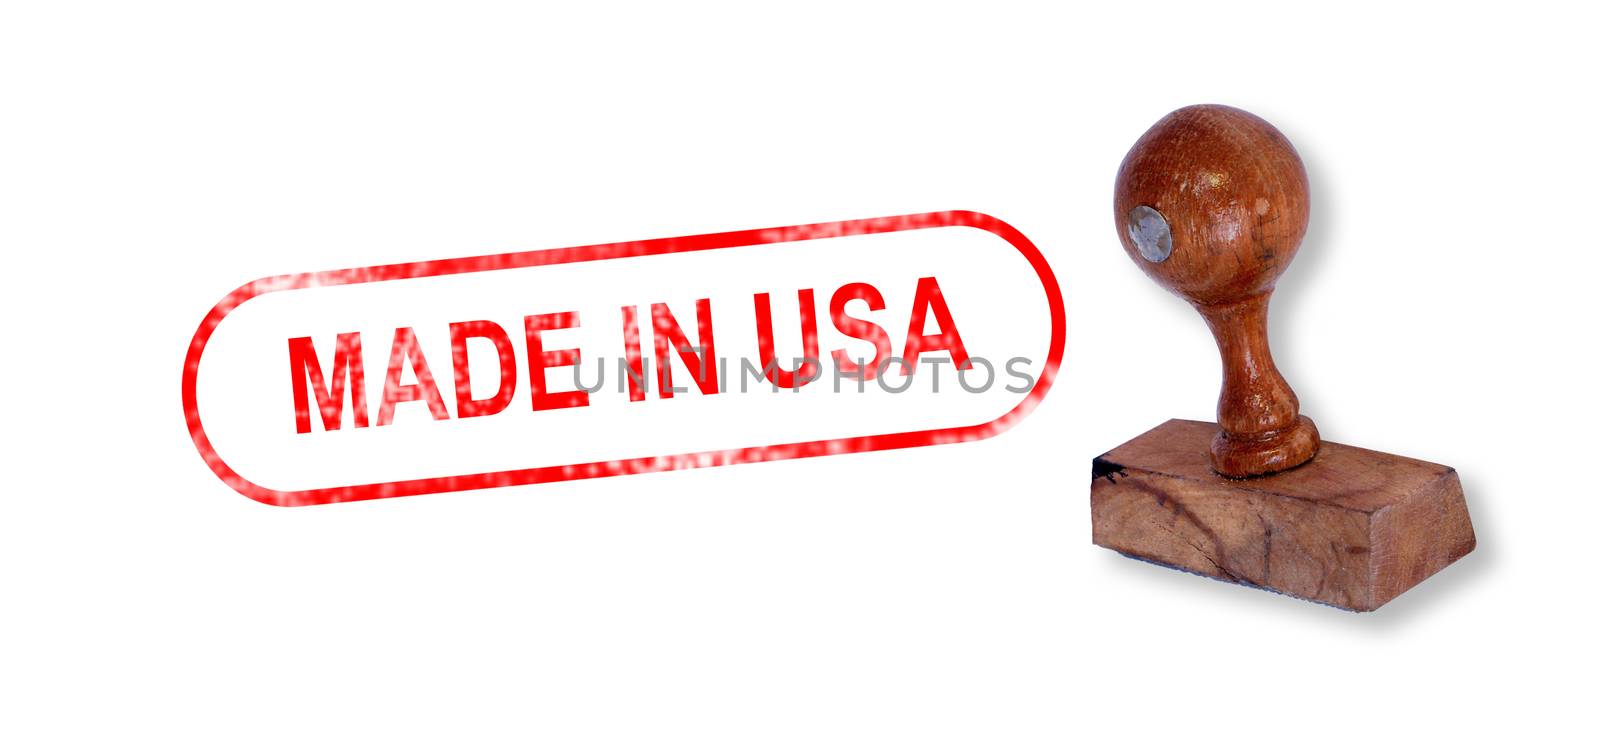 Top view of a rubber stamp with a giant word "MADE IN USA" printed, isolated on white background.